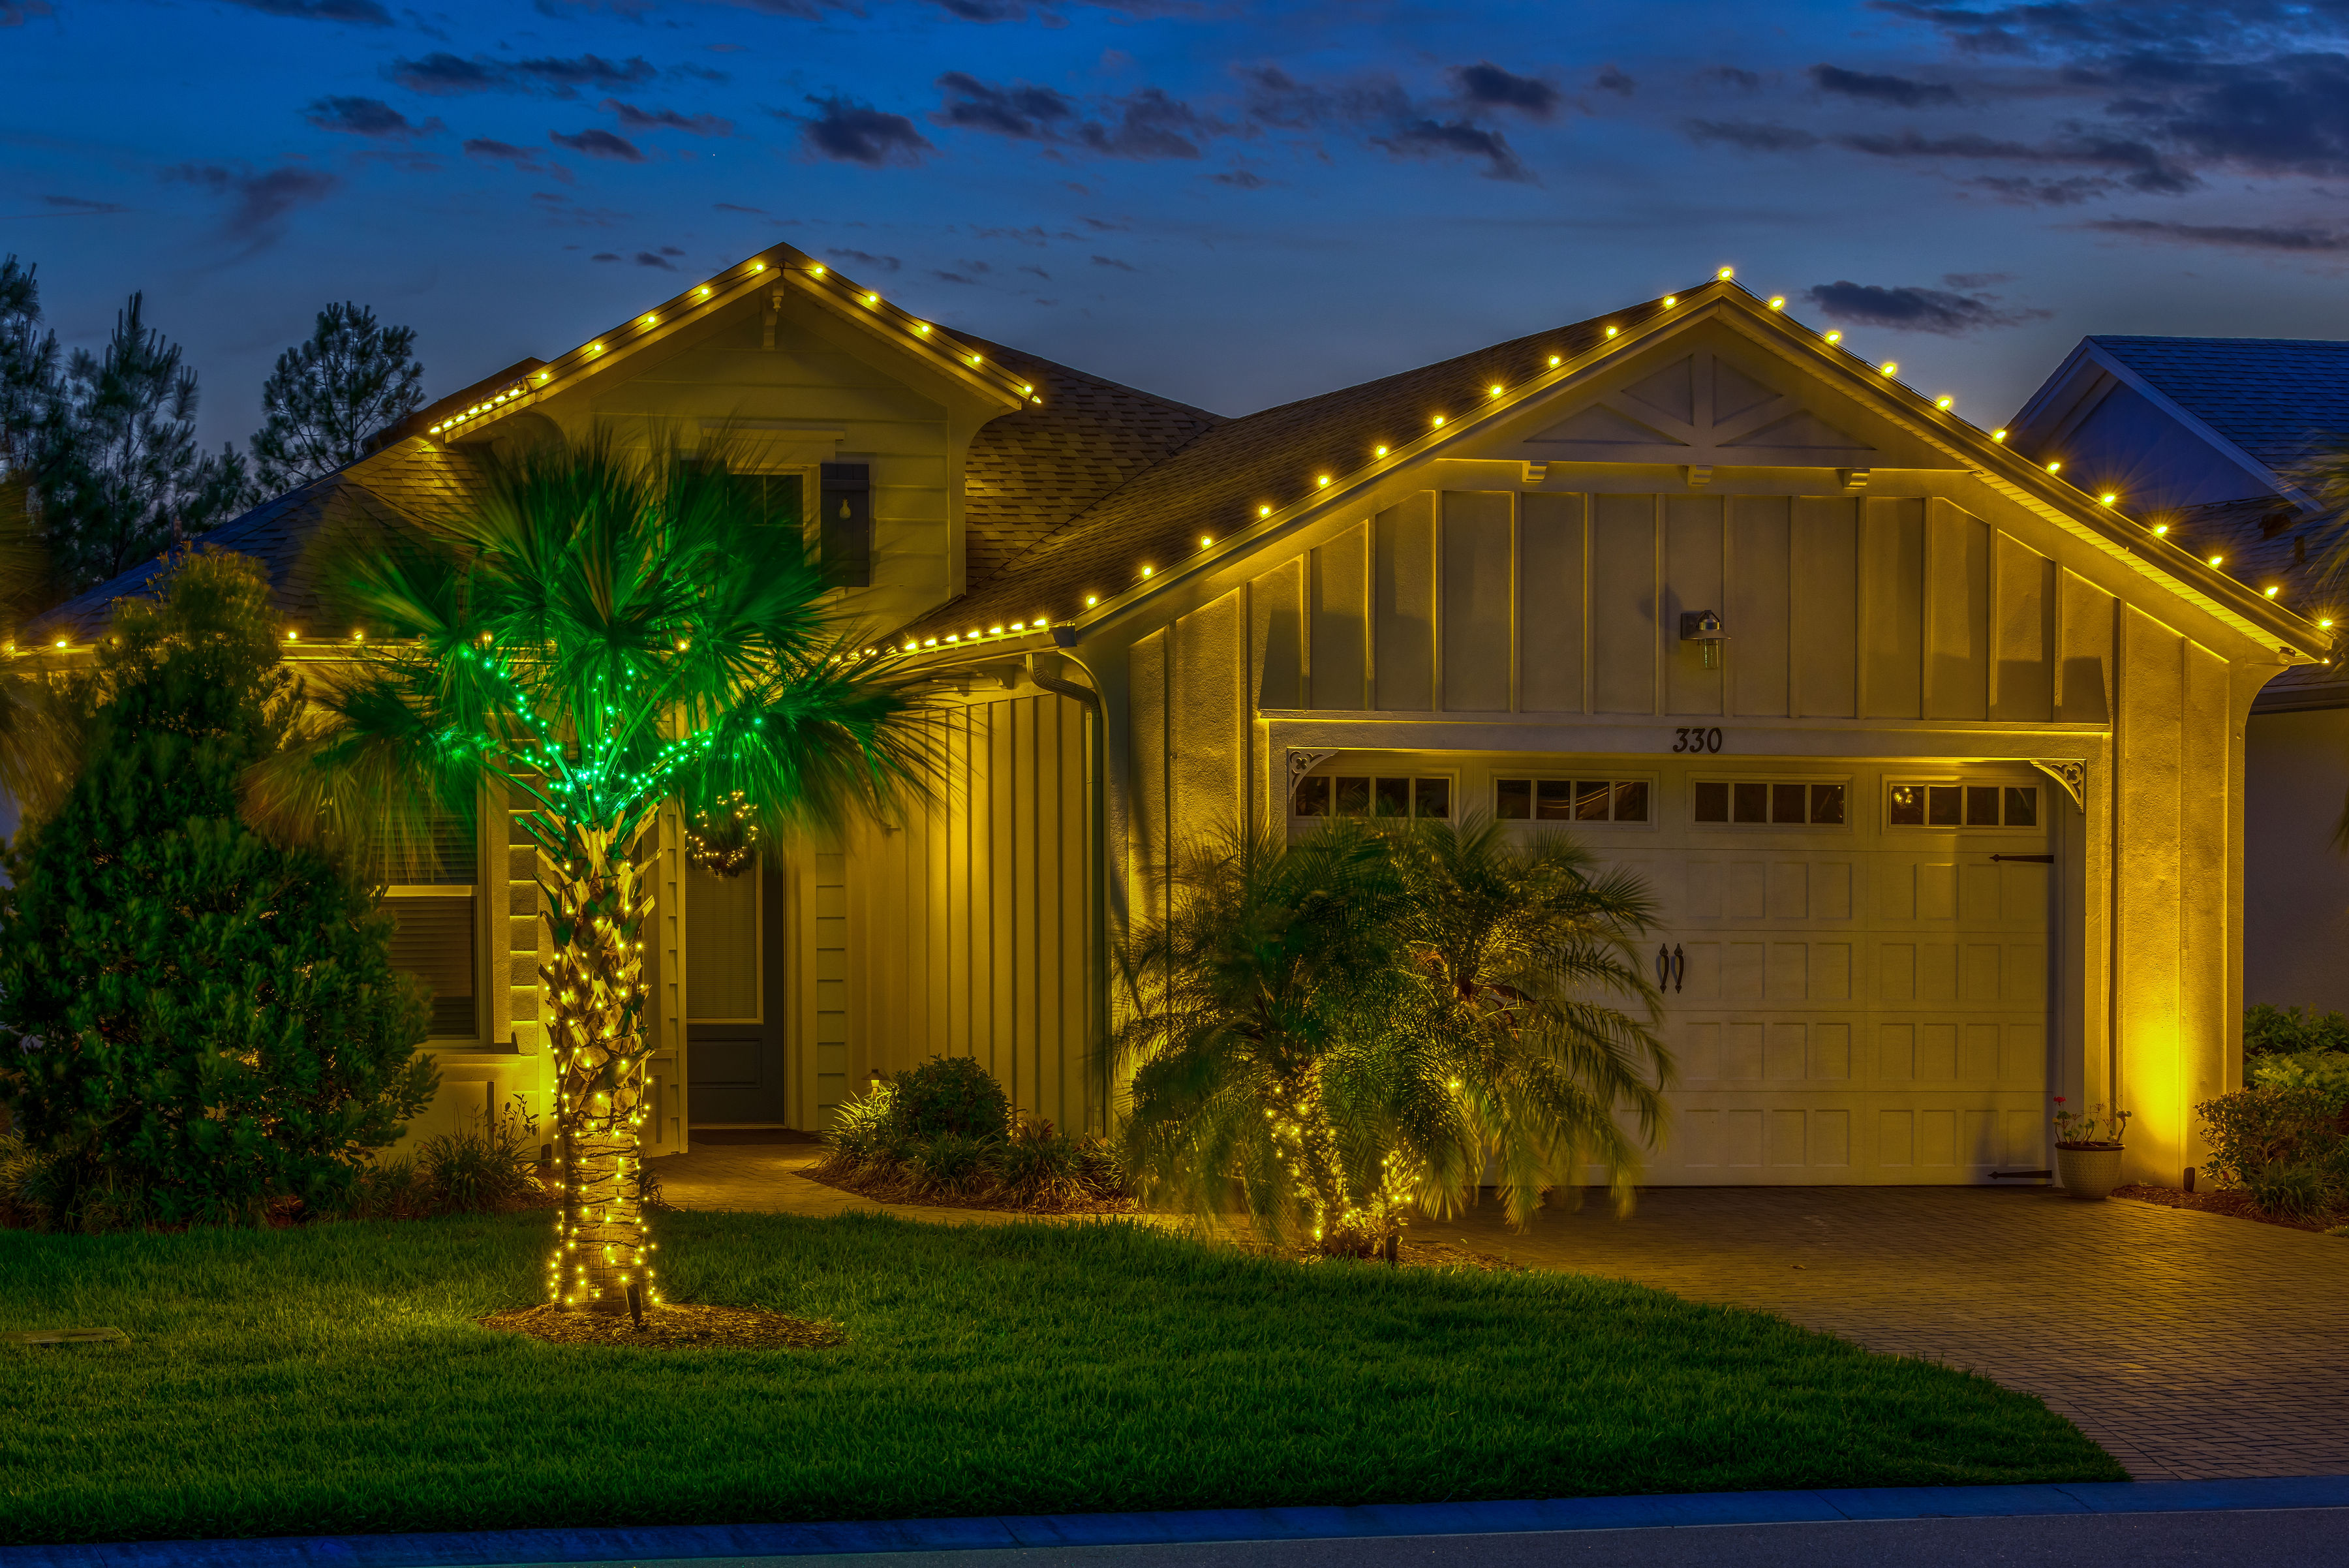 holiday lighting on house and palm trees